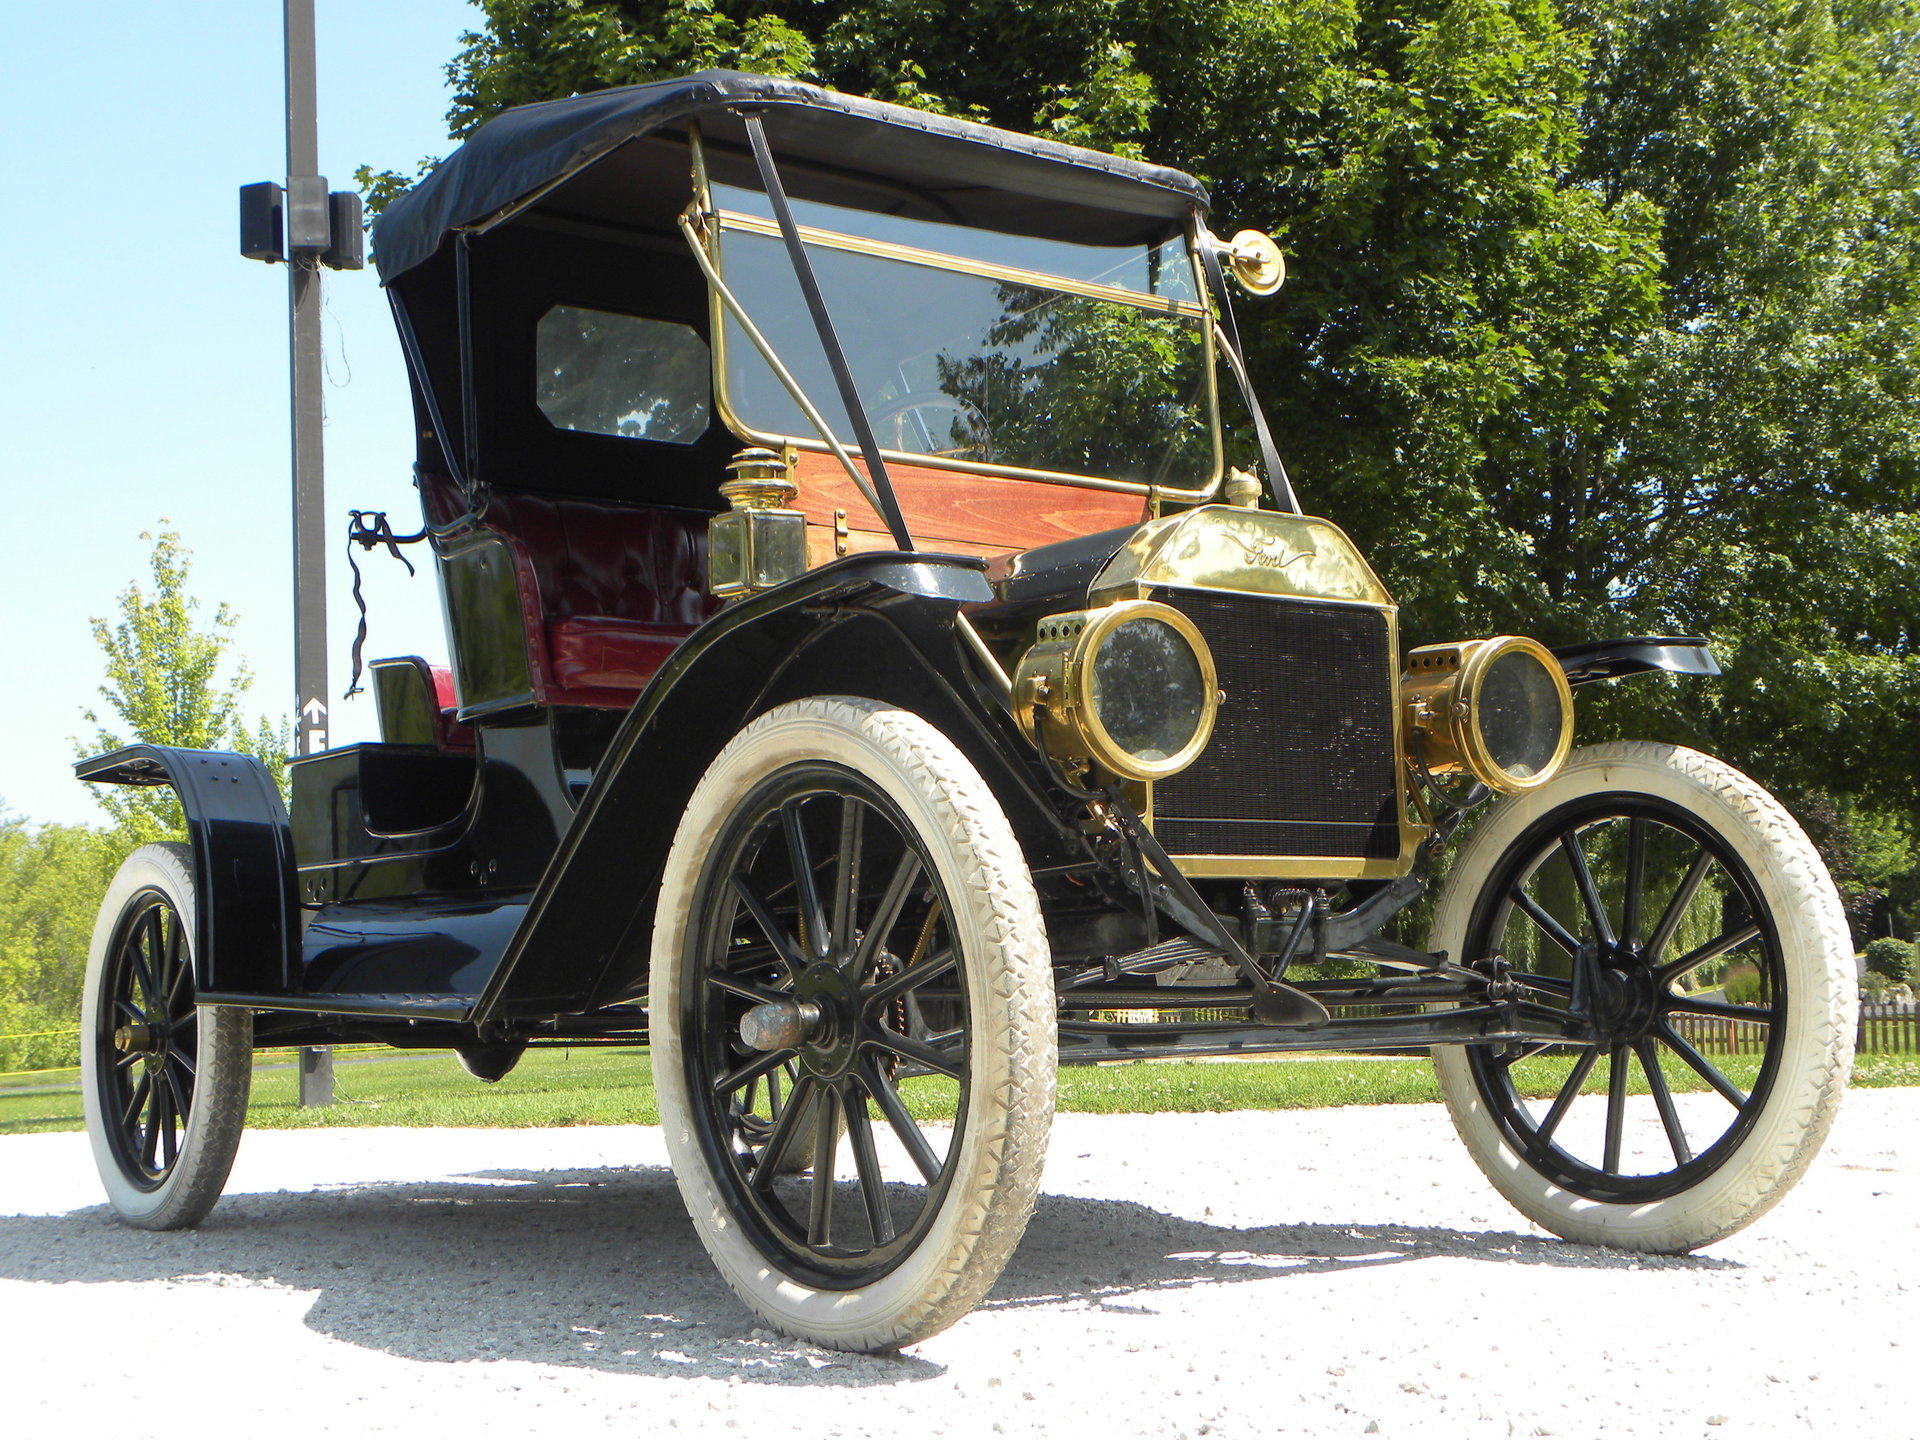 Ford T Touring 1910 rmsothebys com 317135_c8e58adf32aa_hd